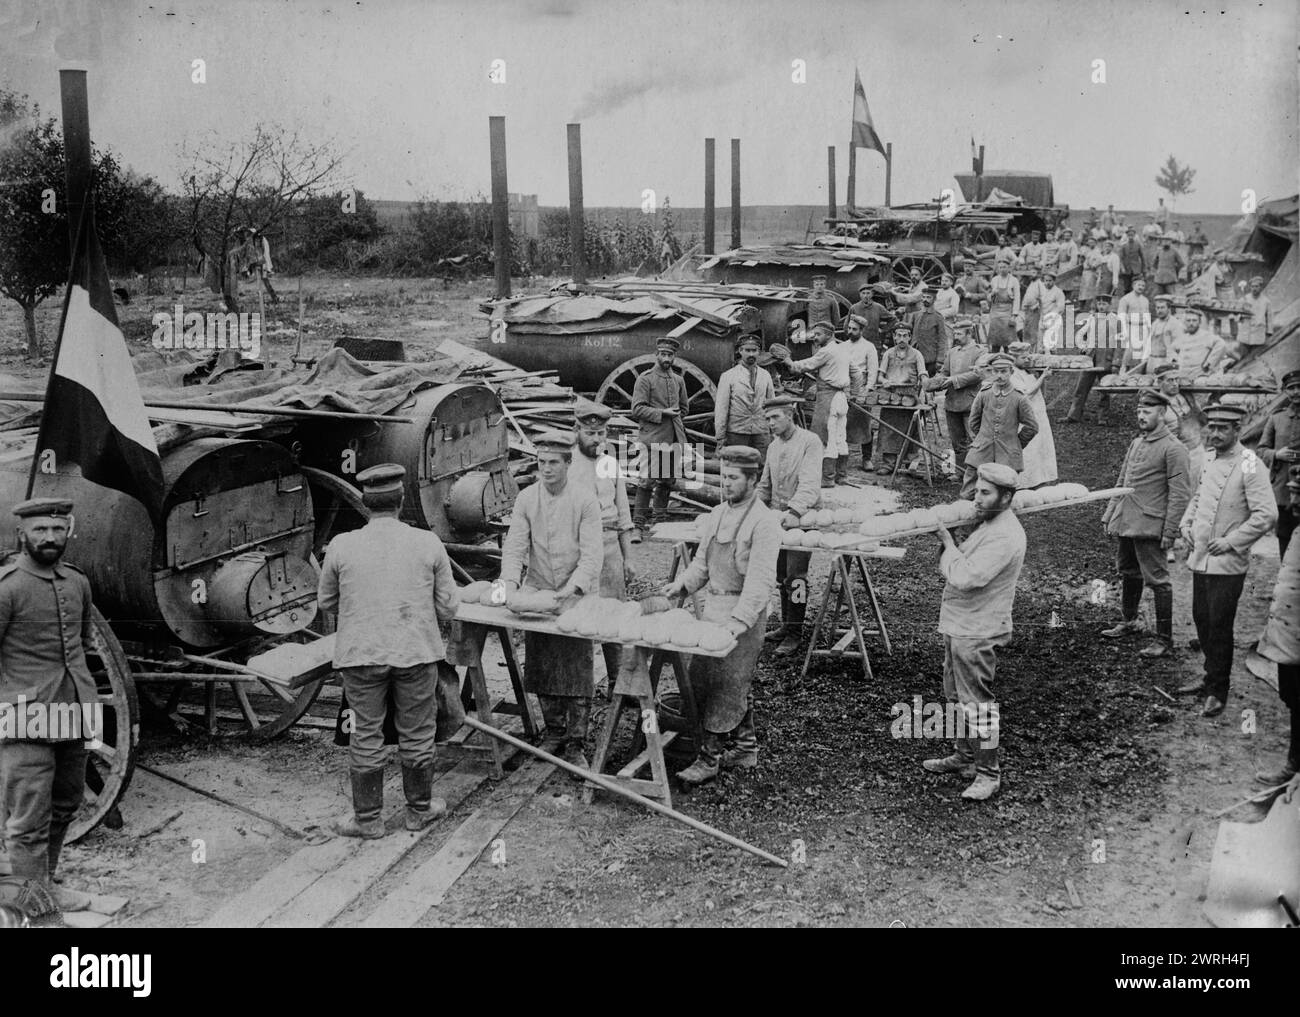 German field bakery near Ypres, 1914. Men cooking bread in mobile ovens near Ypres, Belgium during World War I. Stock Photo